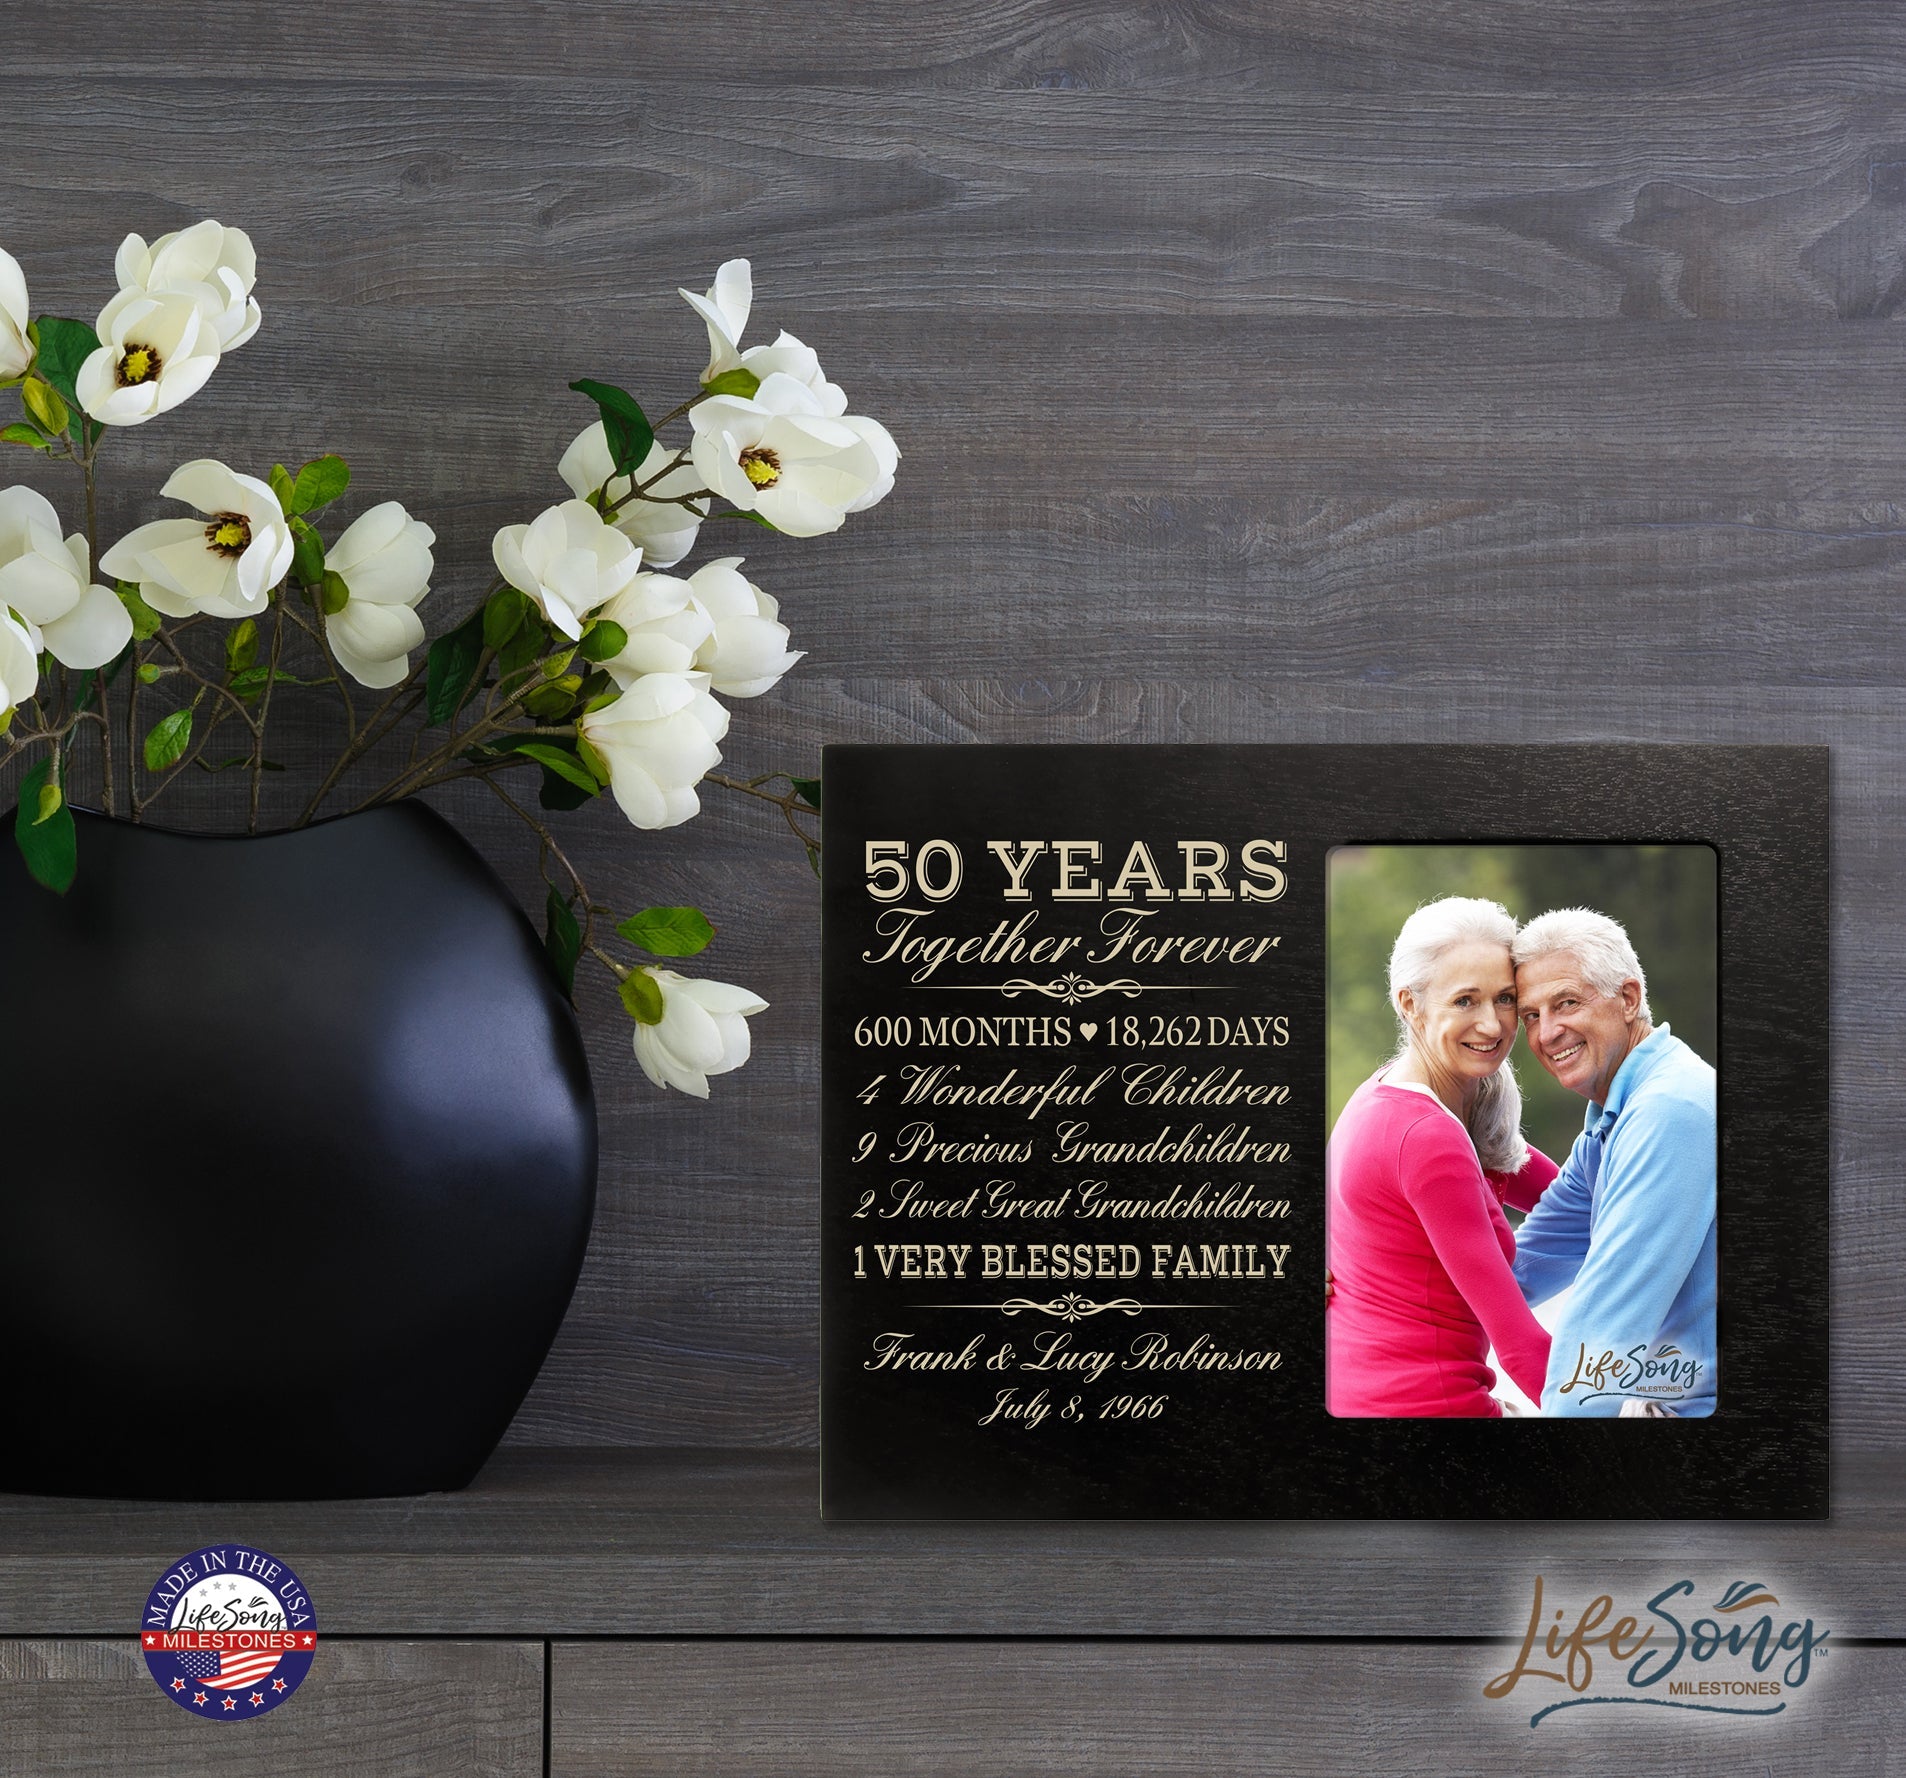 Personalized Anniversary Photo Frame - 50 Years Together - LifeSong Milestones